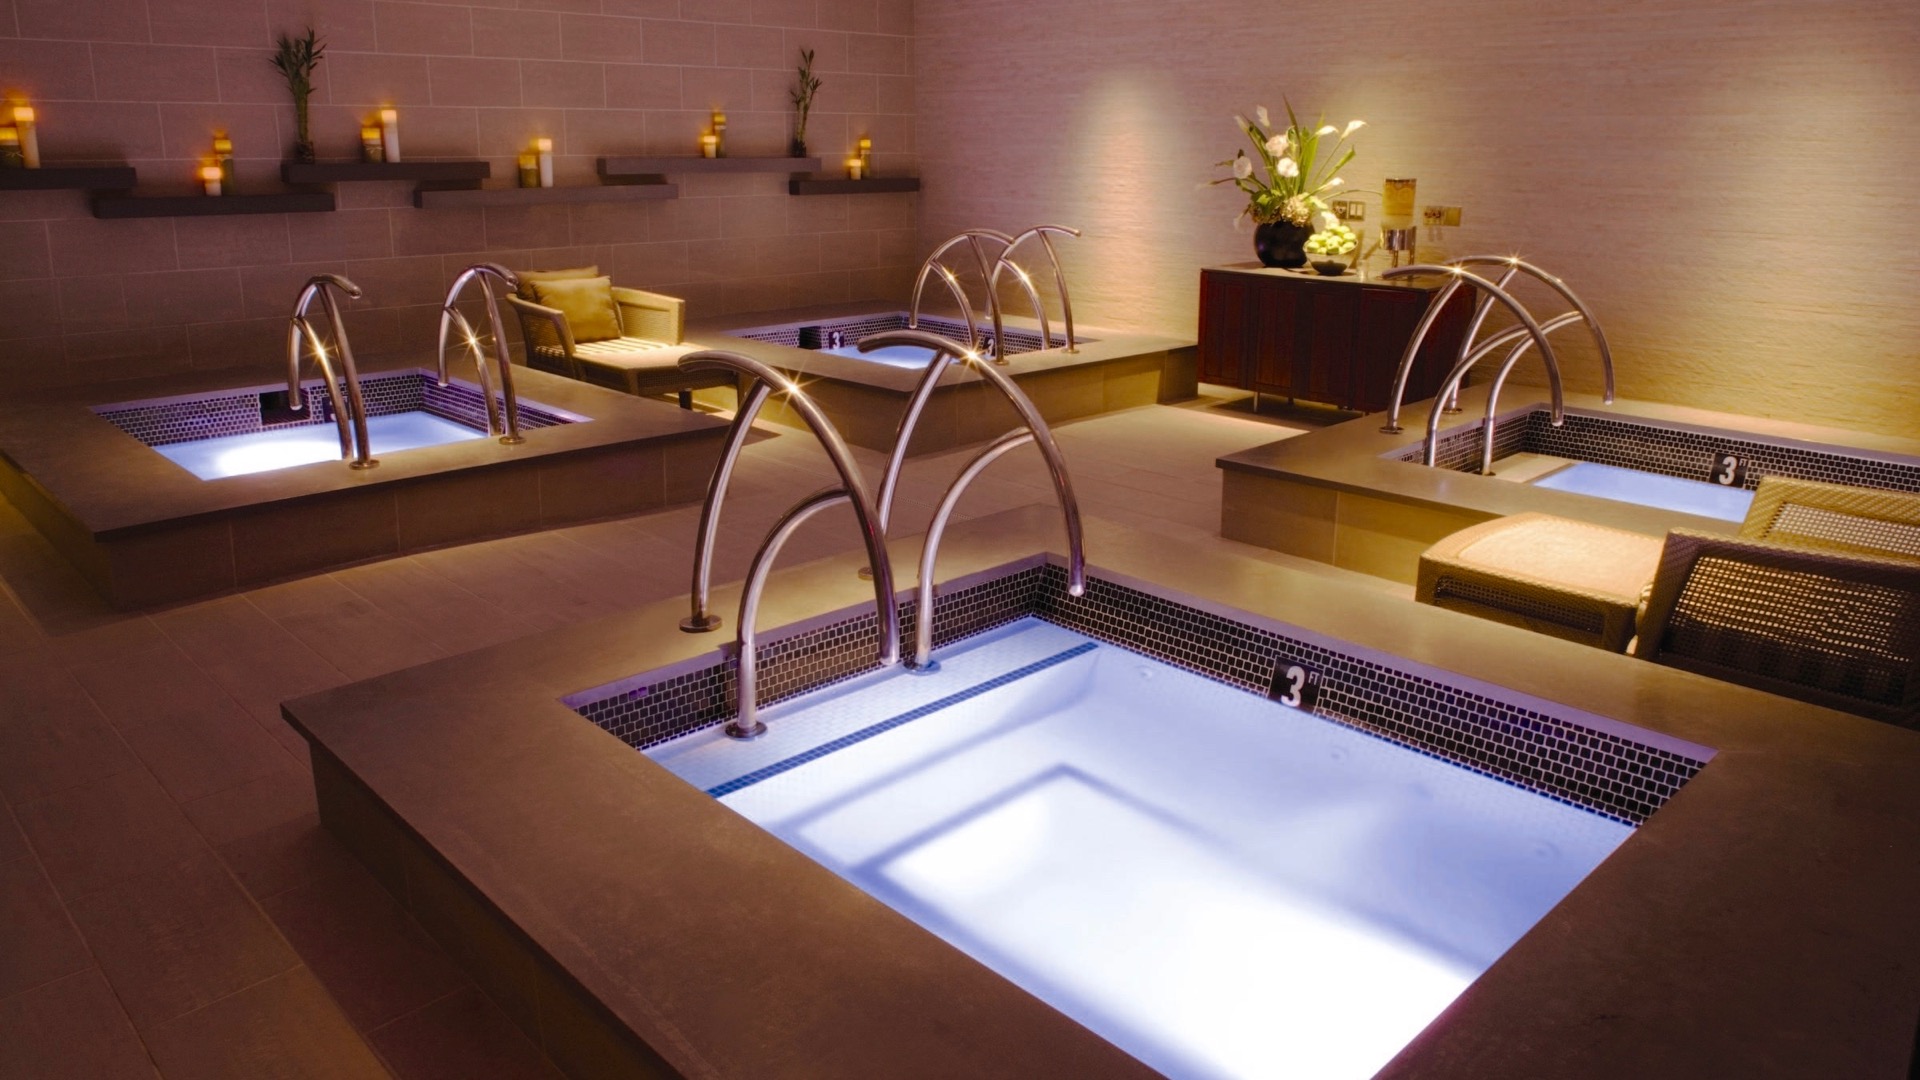 When in Las Vegas, enjoy a therapeutic massage or indulge yourself with a n...